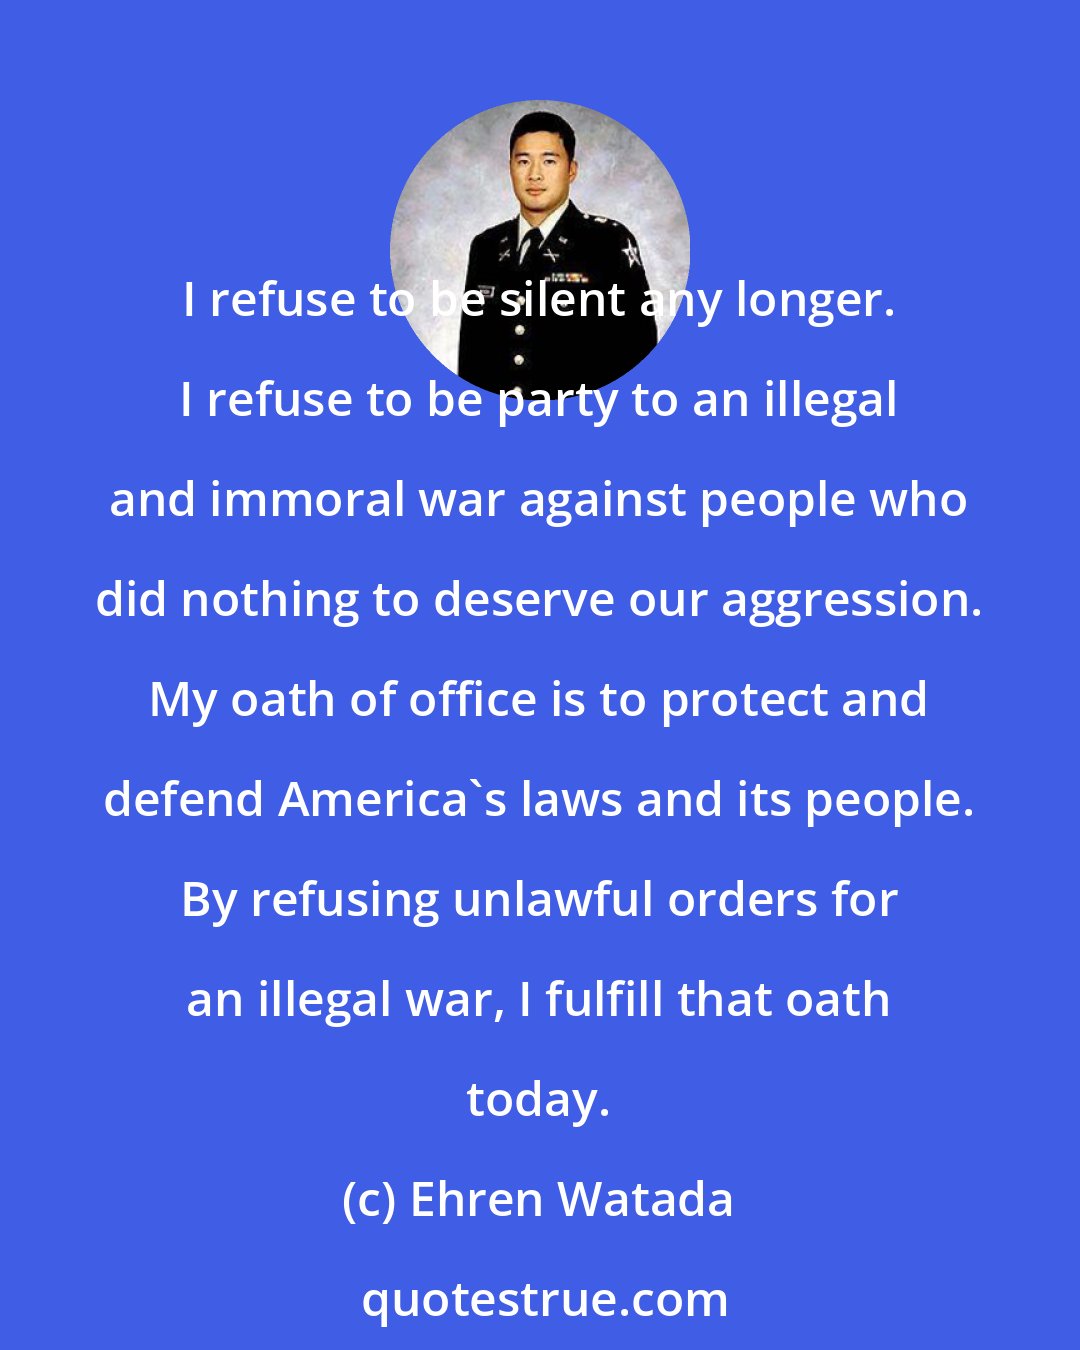 Ehren Watada: I refuse to be silent any longer. I refuse to be party to an illegal and immoral war against people who did nothing to deserve our aggression. My oath of office is to protect and defend America's laws and its people. By refusing unlawful orders for an illegal war, I fulfill that oath today.